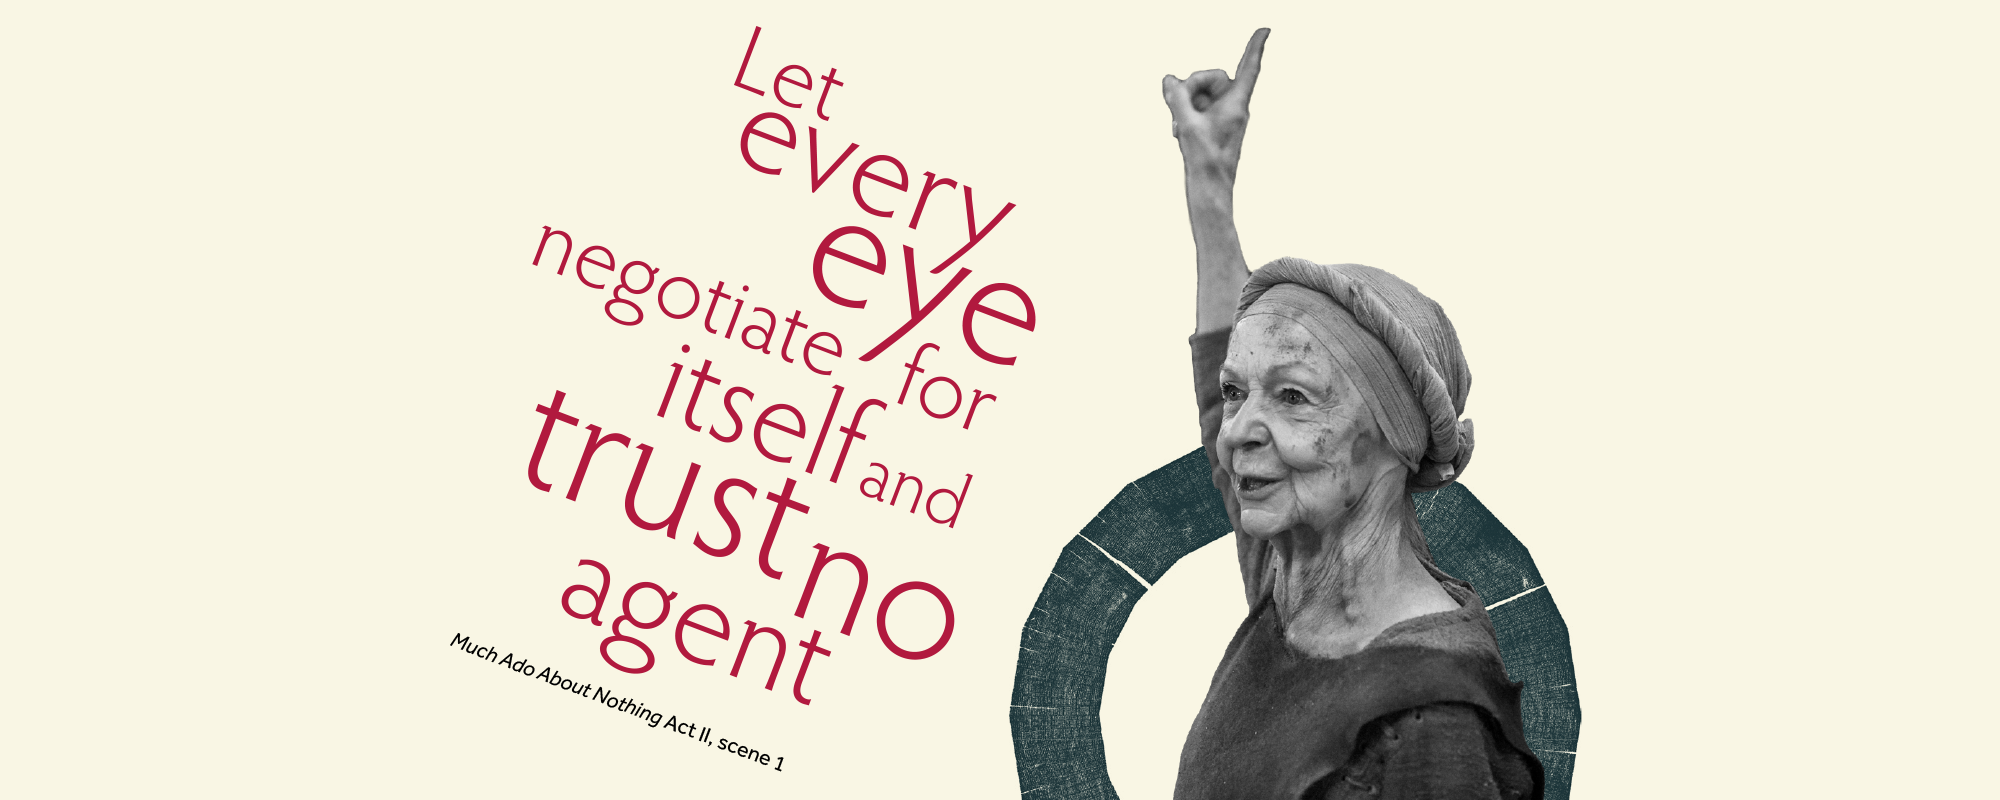 Text: Let every eye negotiate for itself and trust no agent, Much Ado About Nothing, Act II, scene 1 and image of a woman pointing her finger upwards above her head